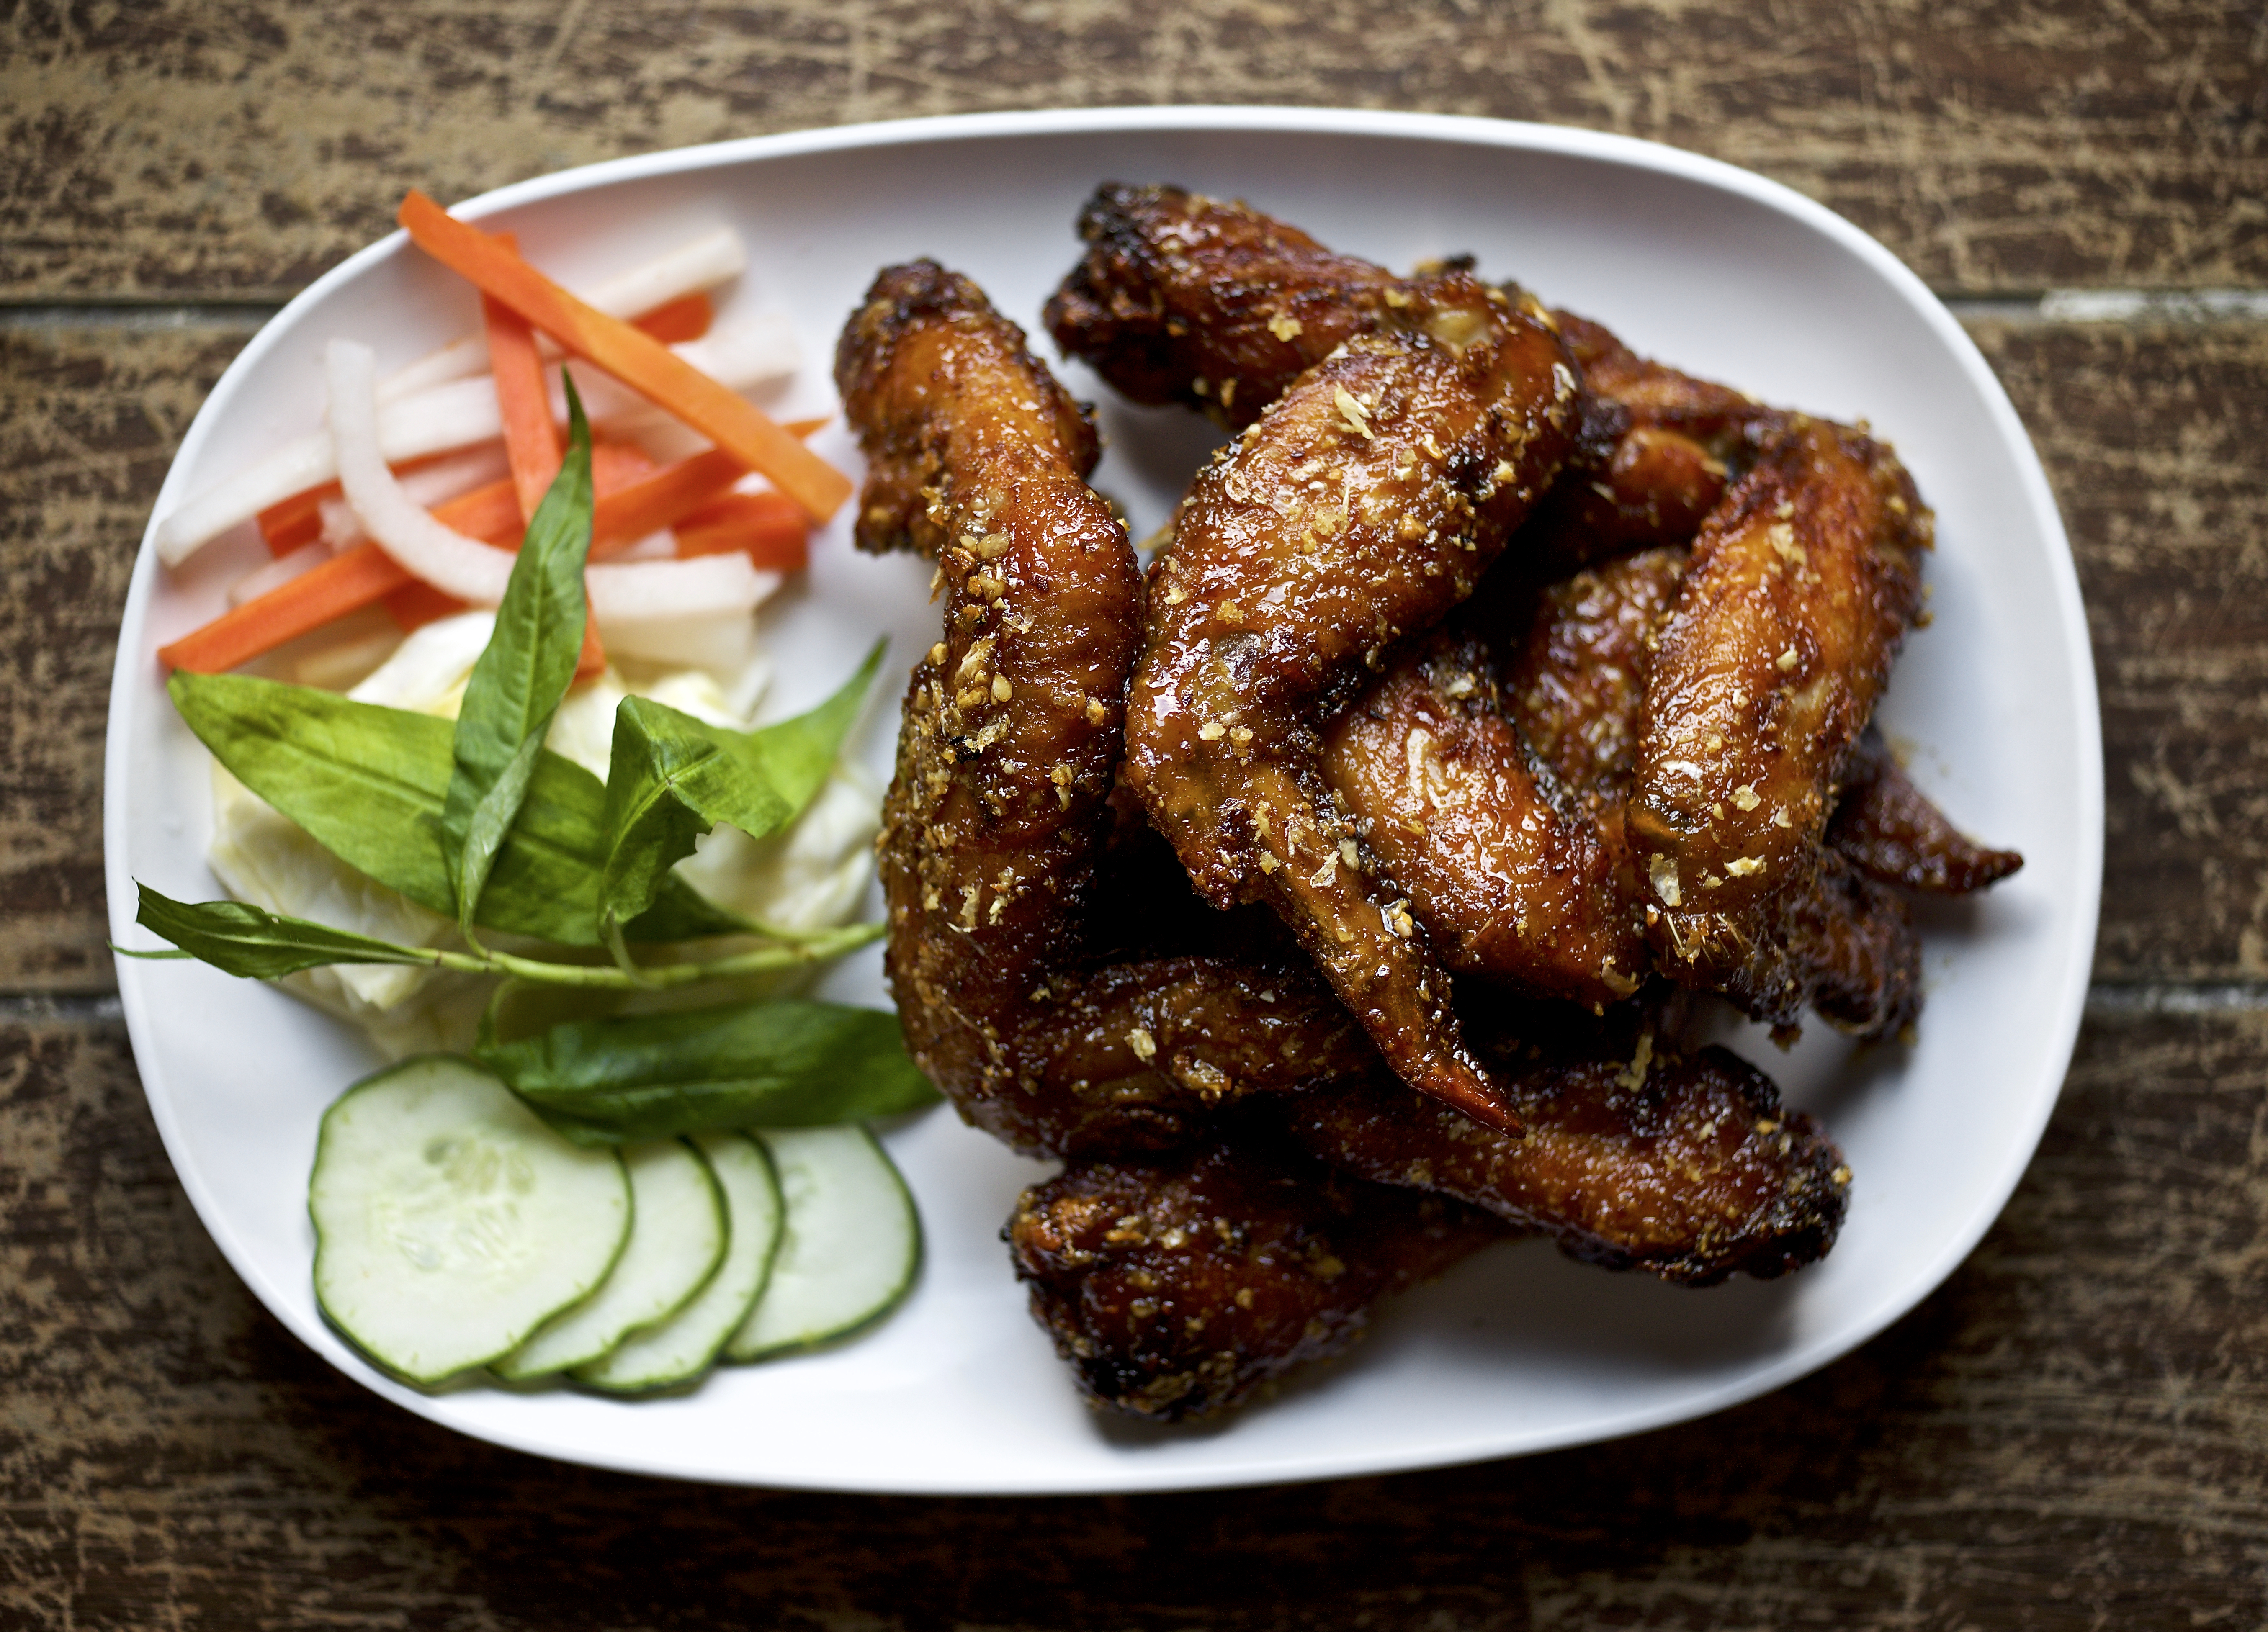 A plate of chicken wings with carrots, cucumbers, and more on the left